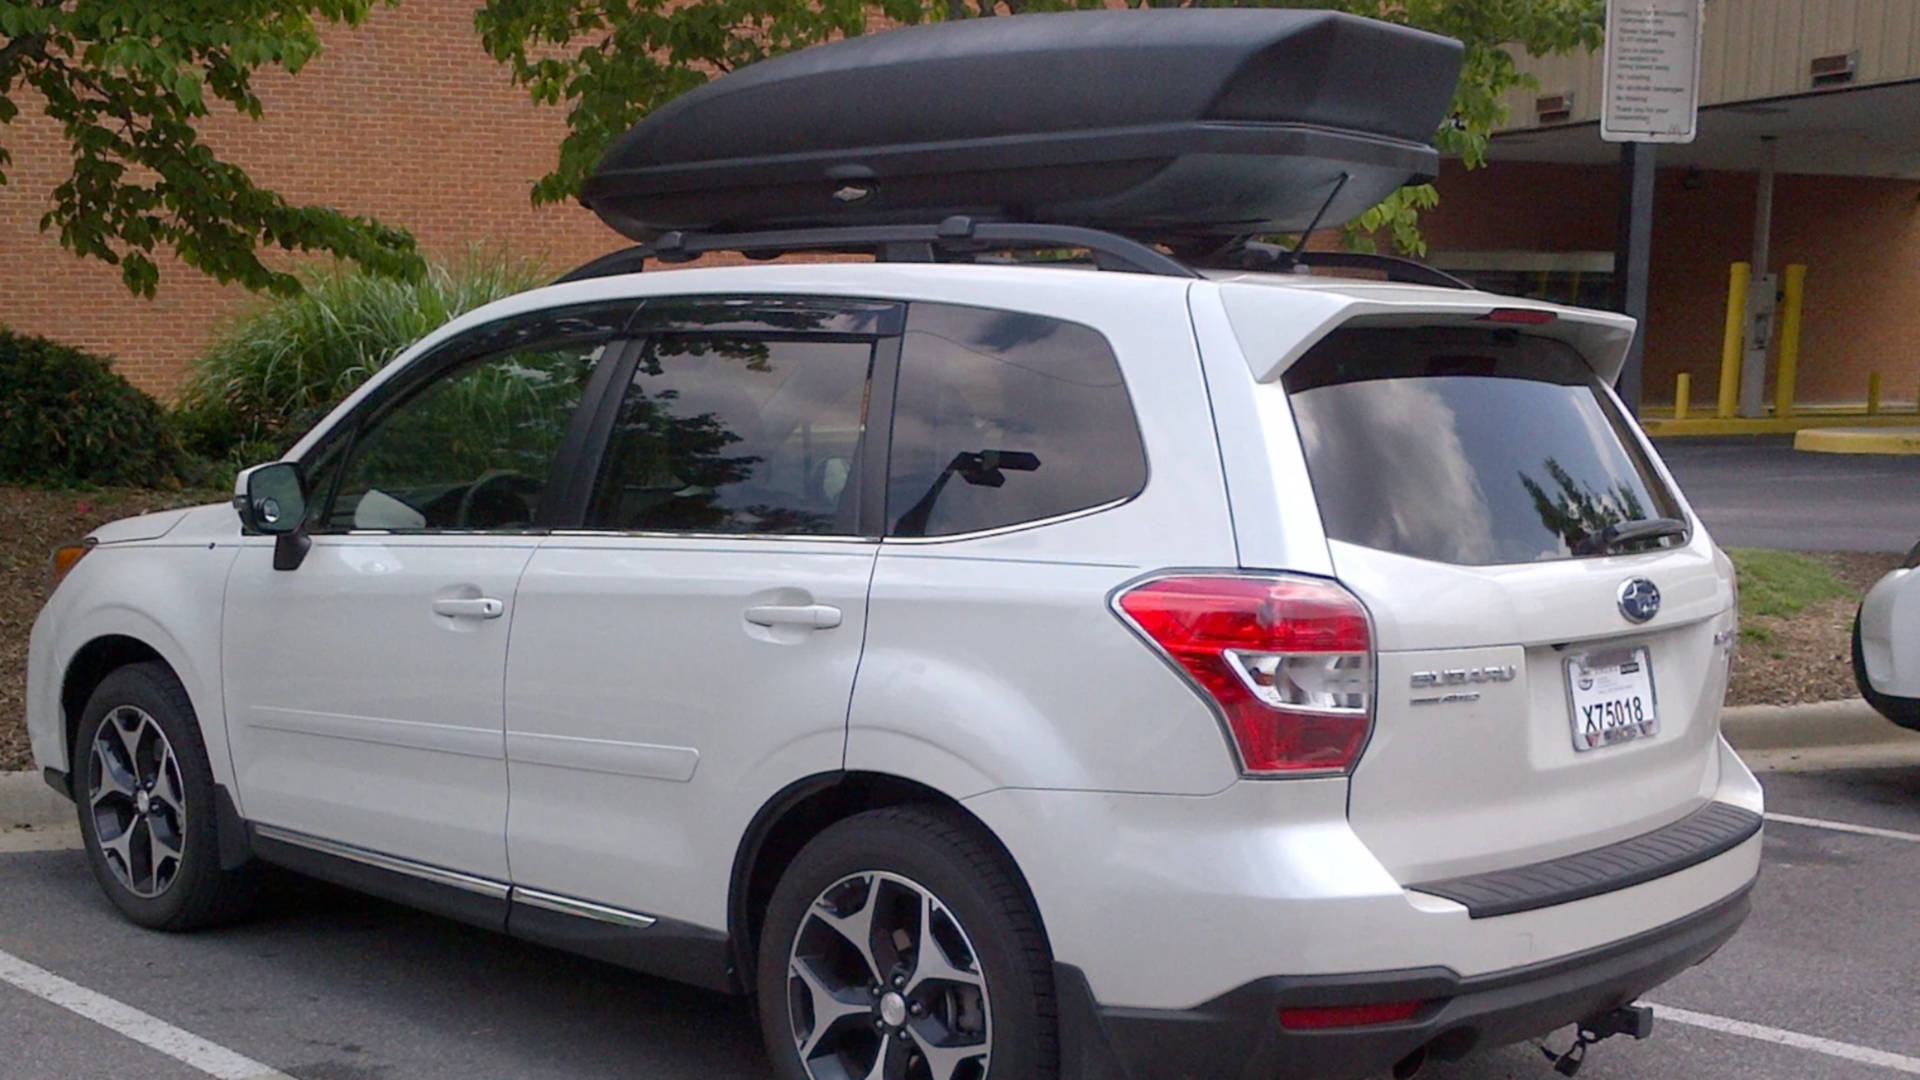 best roof box for skis,roof box for skis,how to secure skis in roof box,how to pack skis in a cargo box,how to transport skis in car